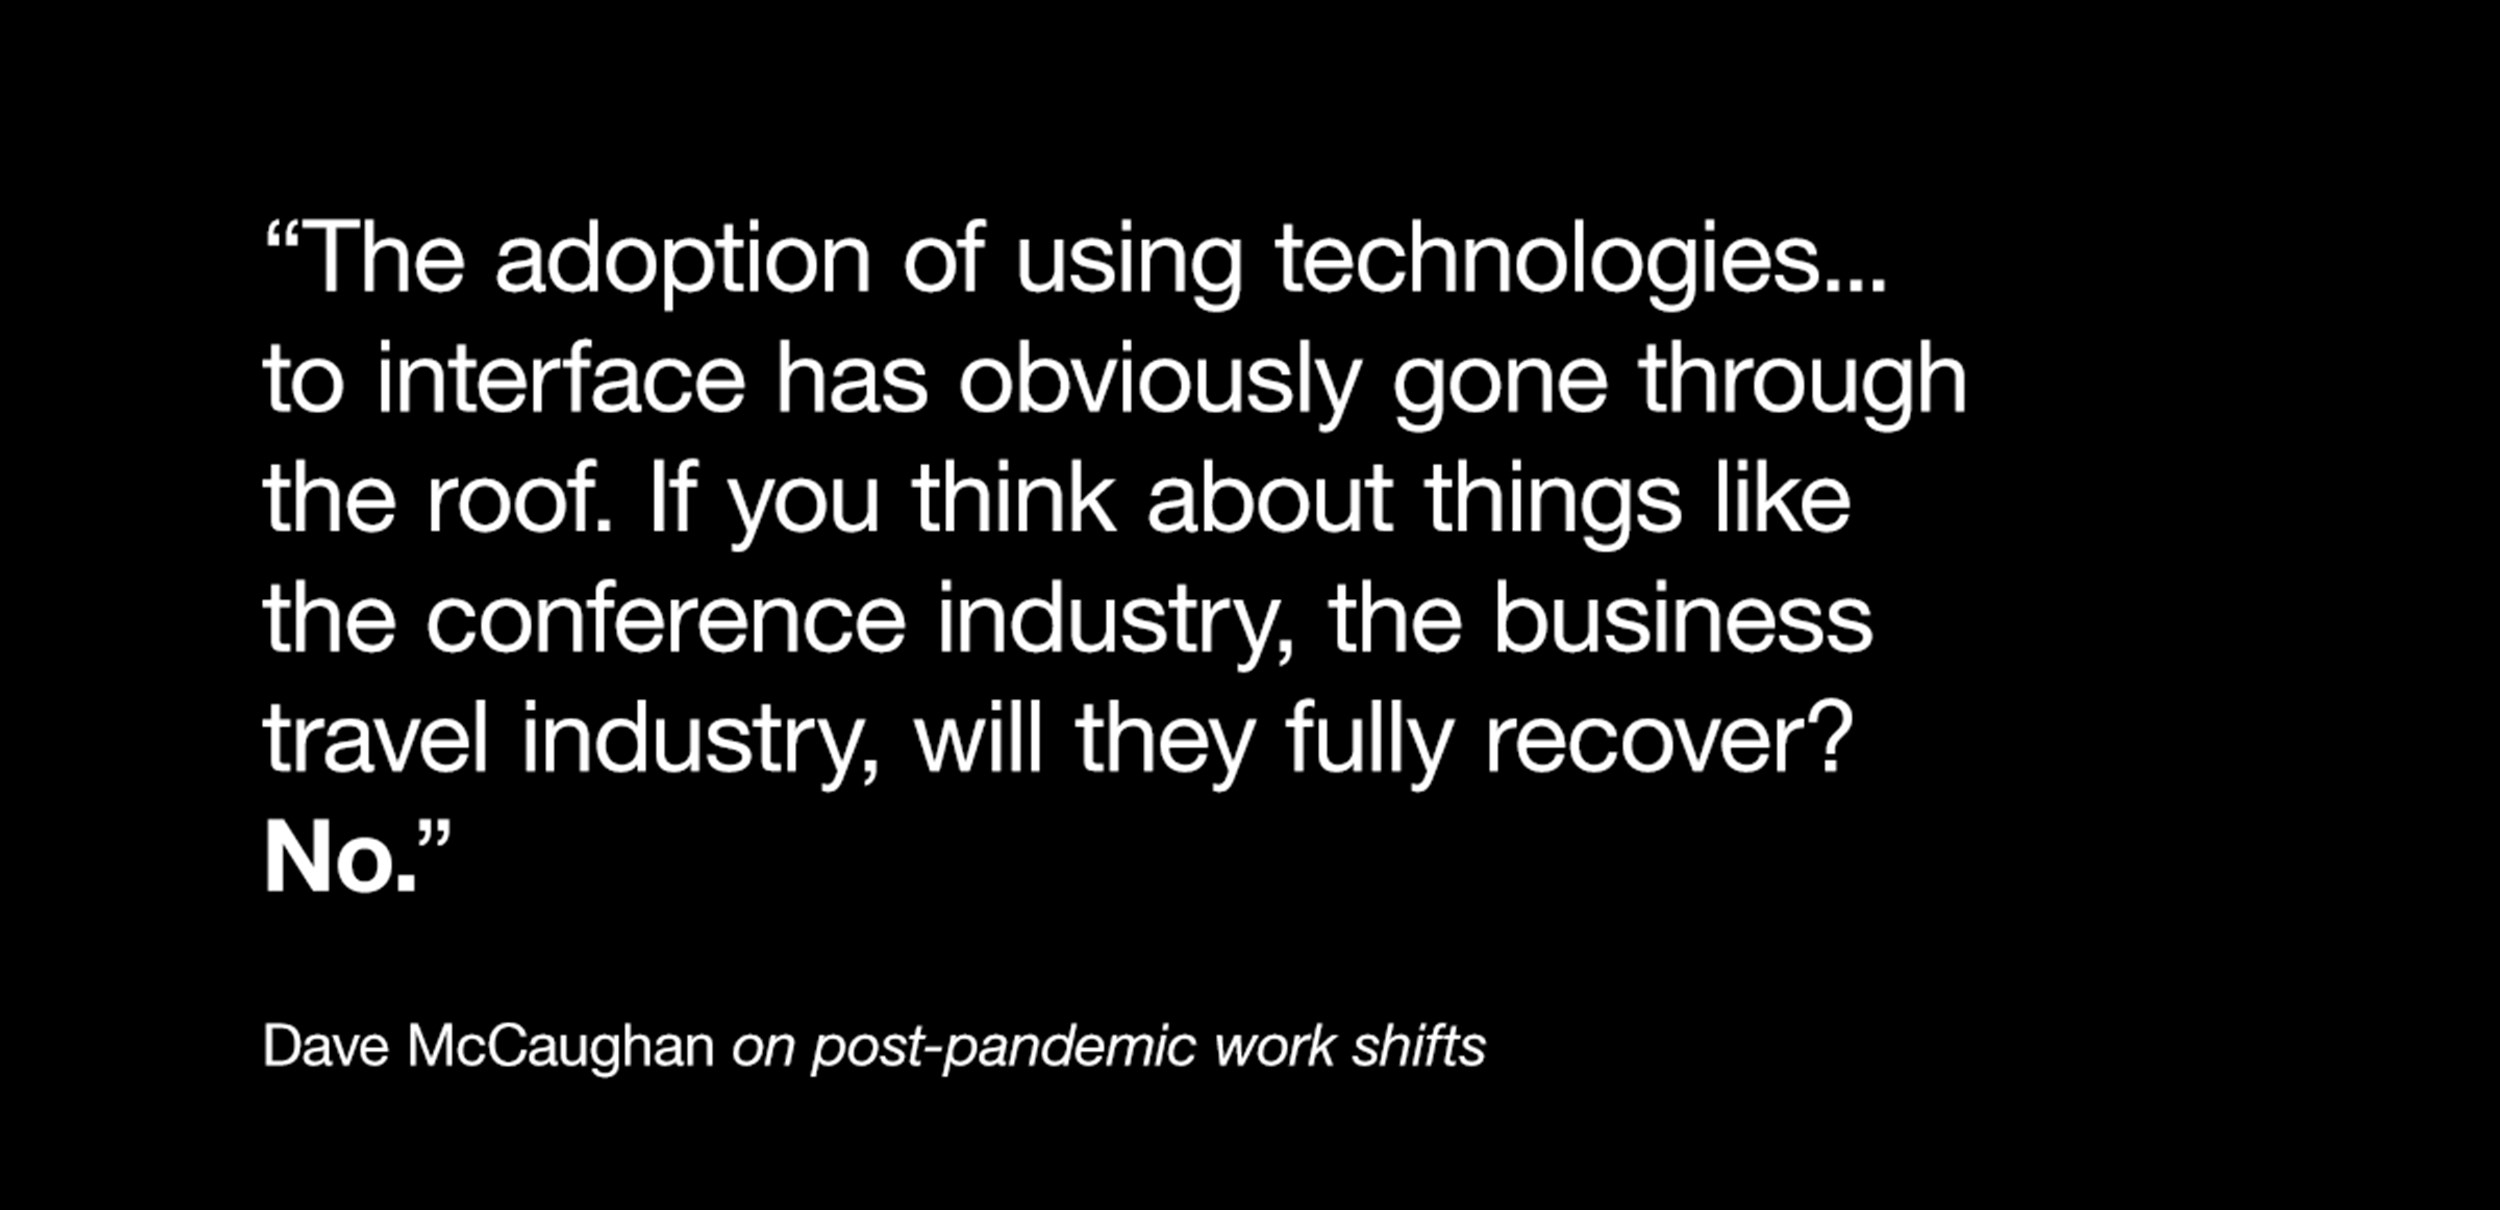 Quote image about industries recovering from COVID19